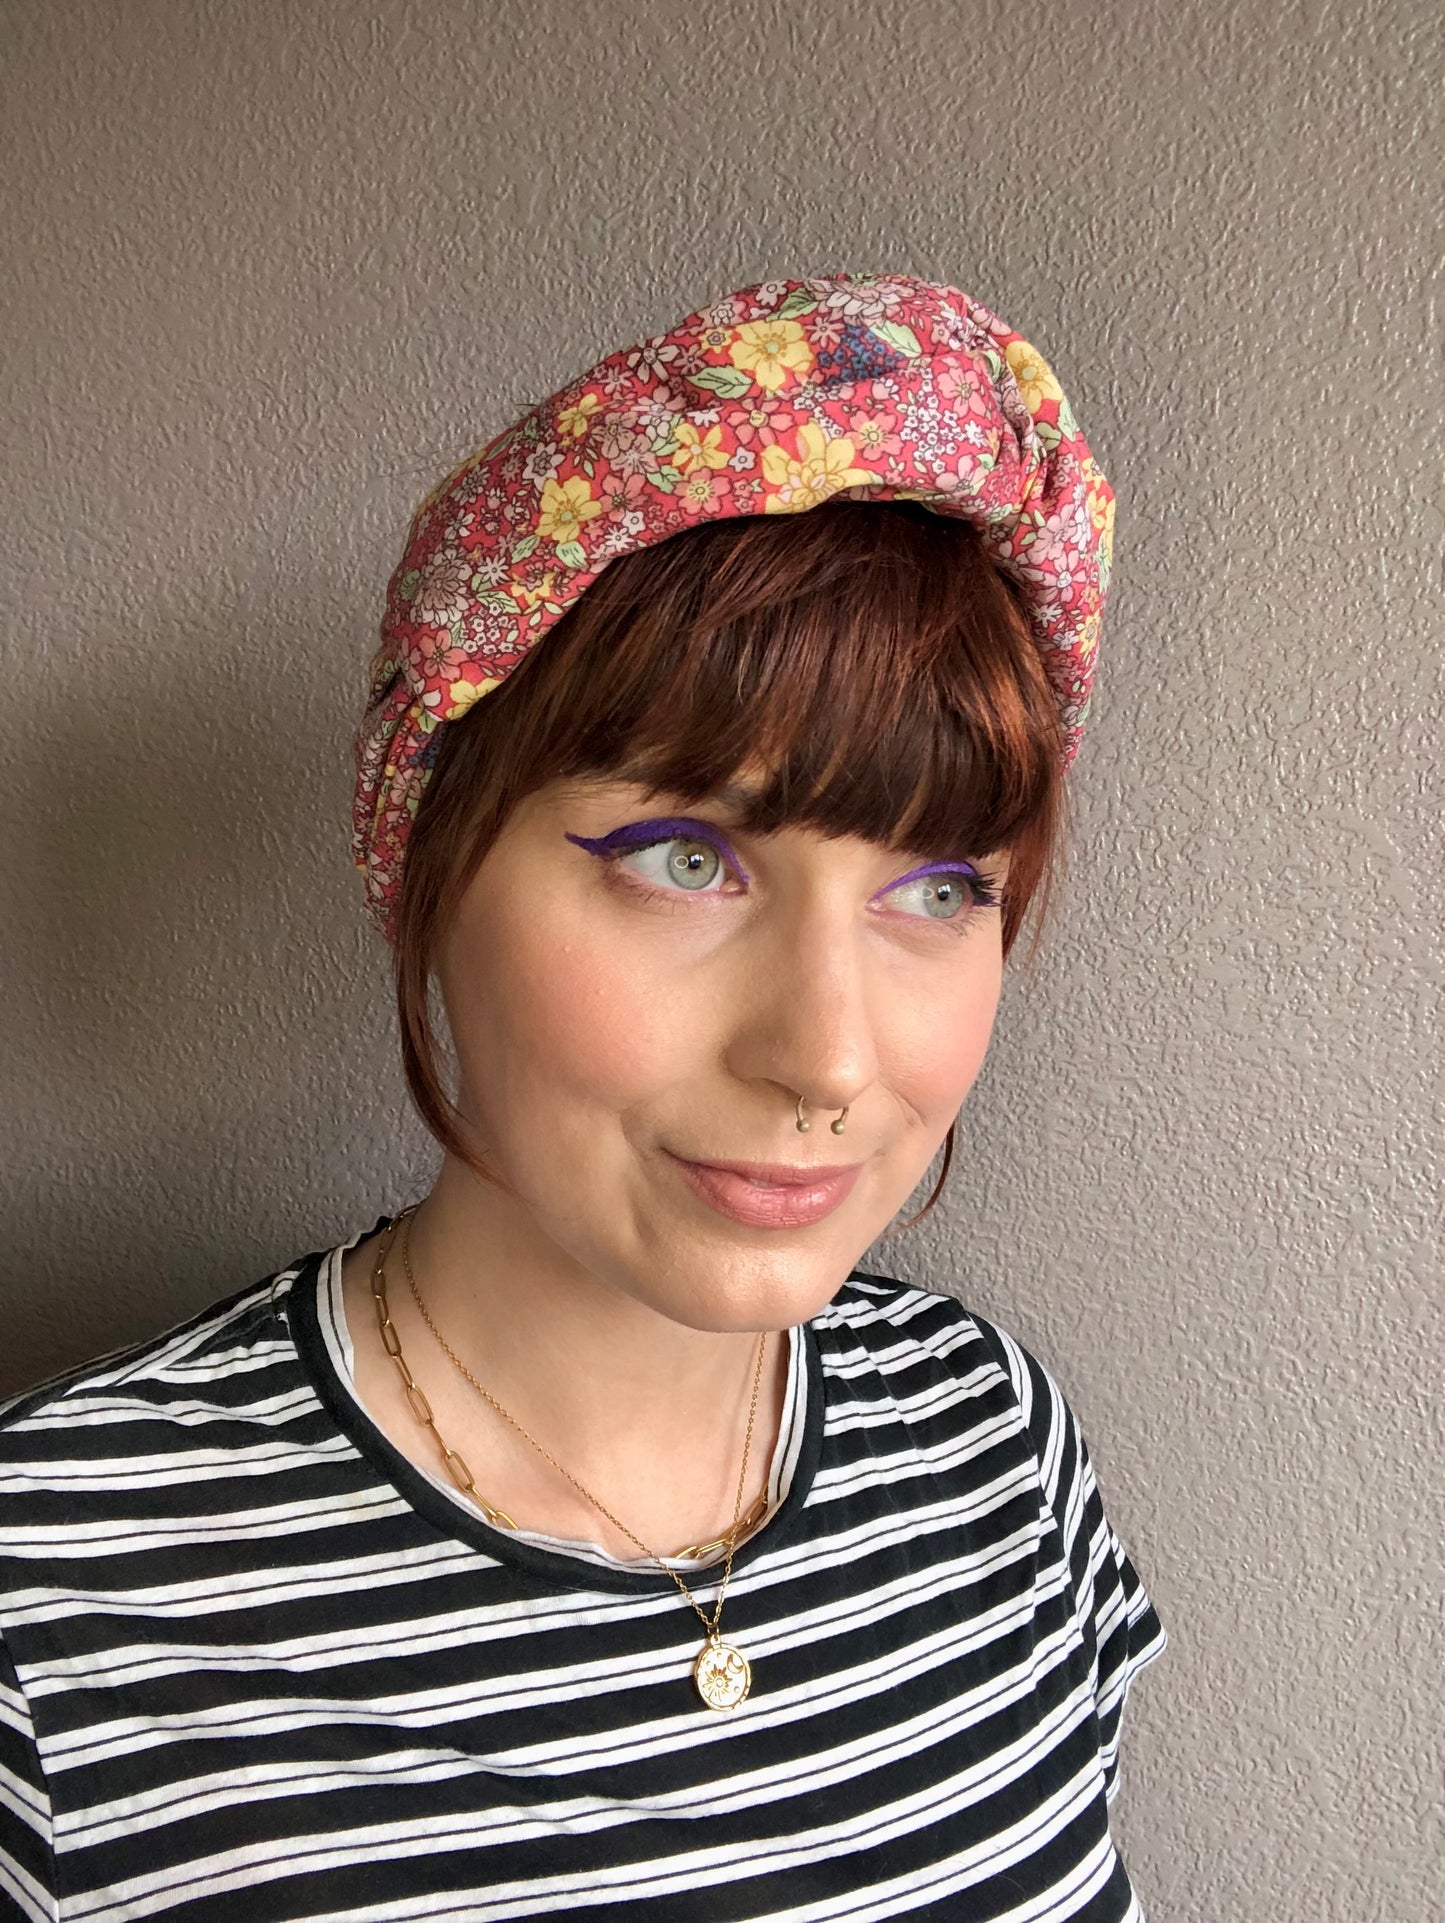 Ditsy floral print - coral or blue wire wrap headband